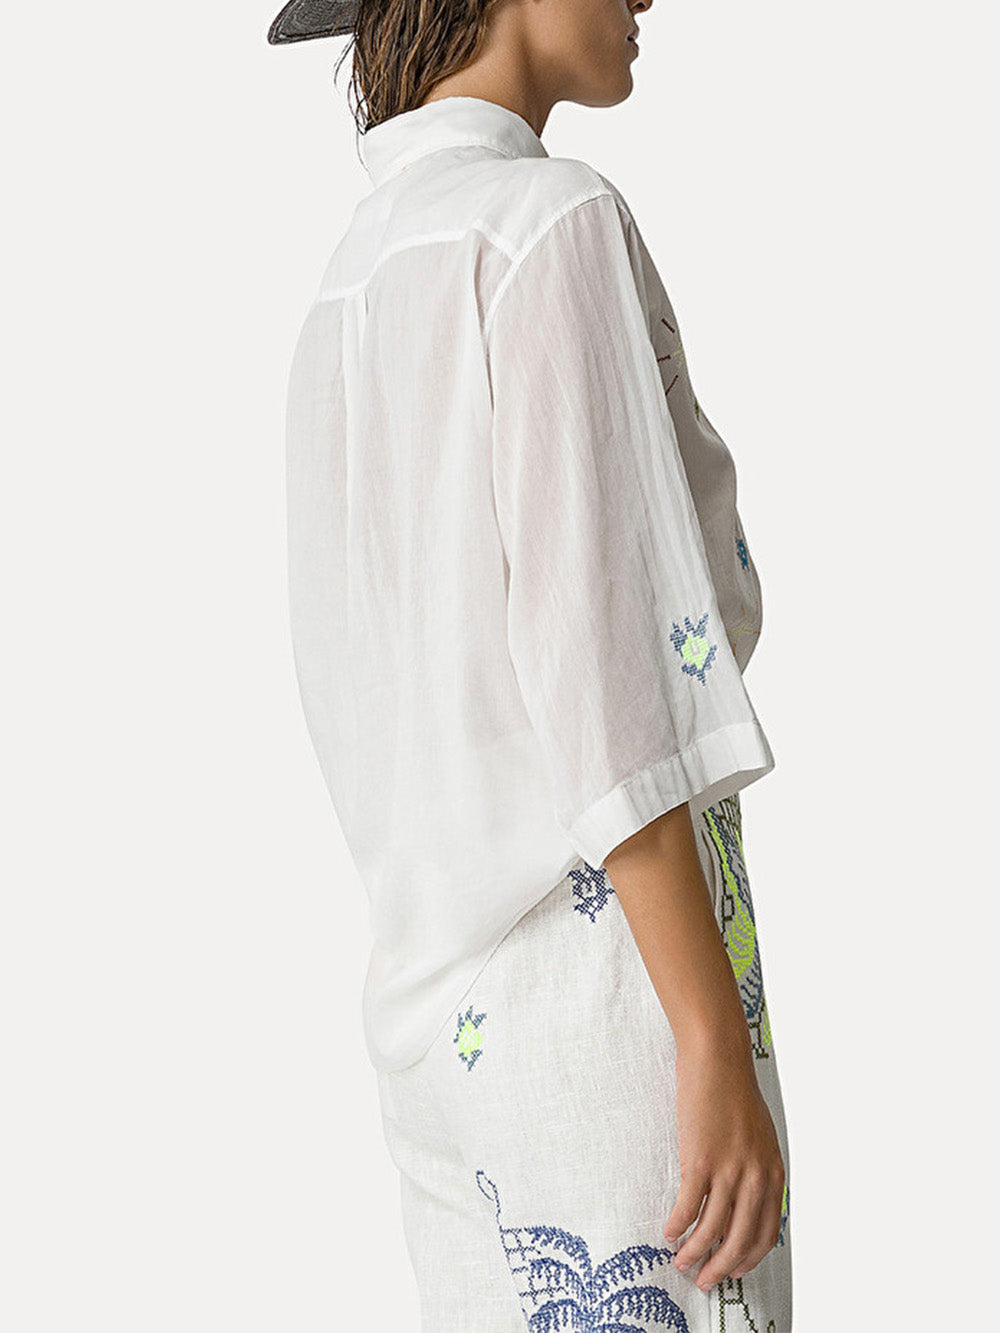 CHEMISE EDEN EMBROIDERY